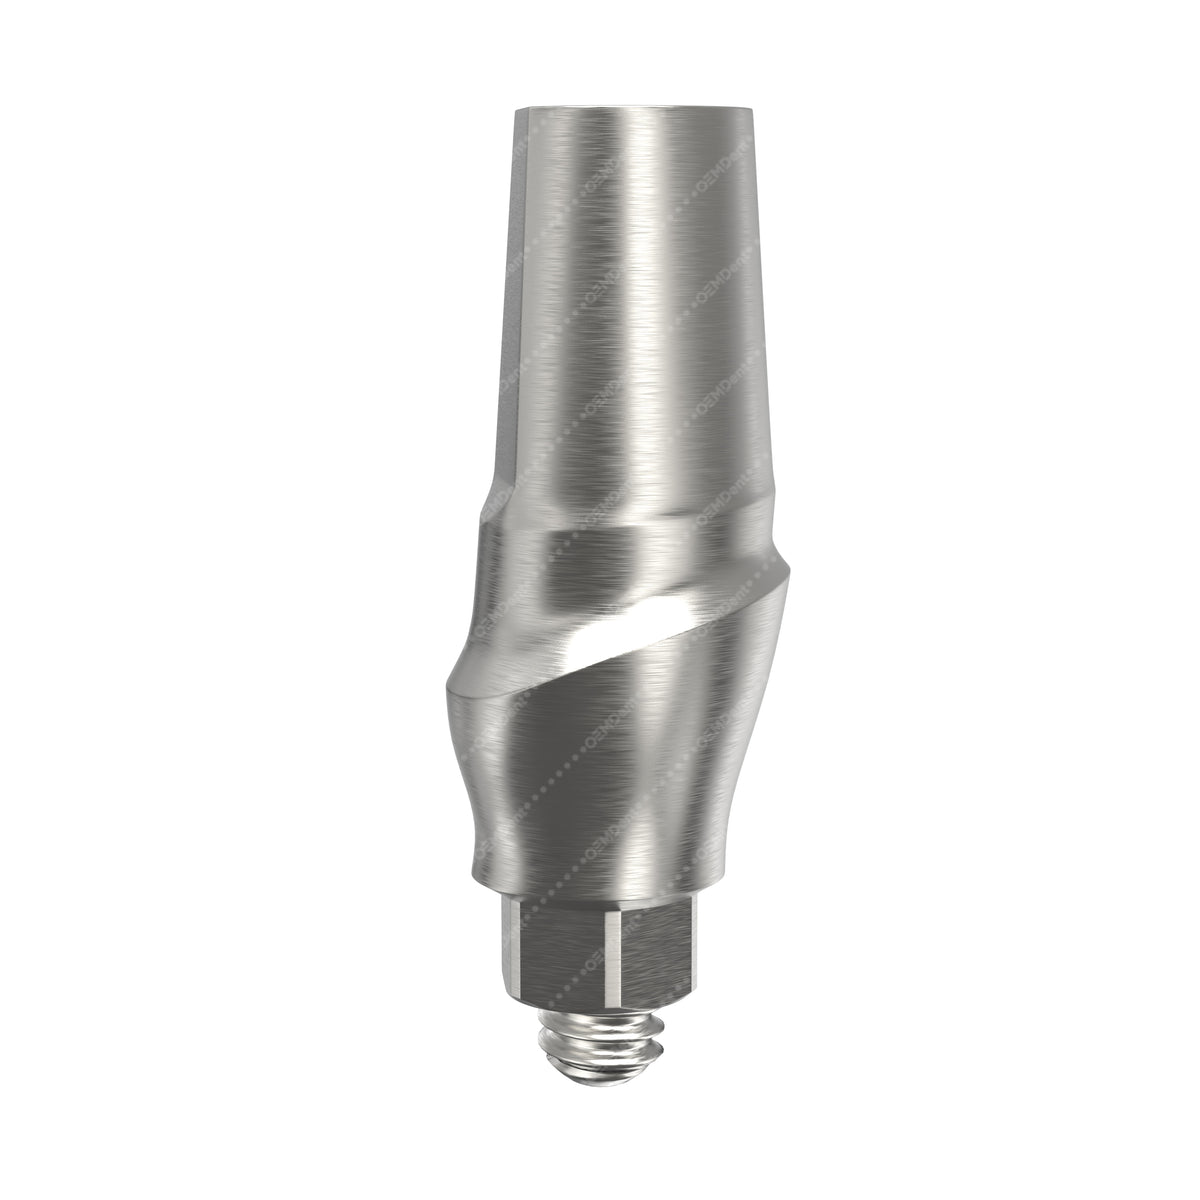 Anatomically Shaped Straight Abutment 57890 - BEGO® Compatible